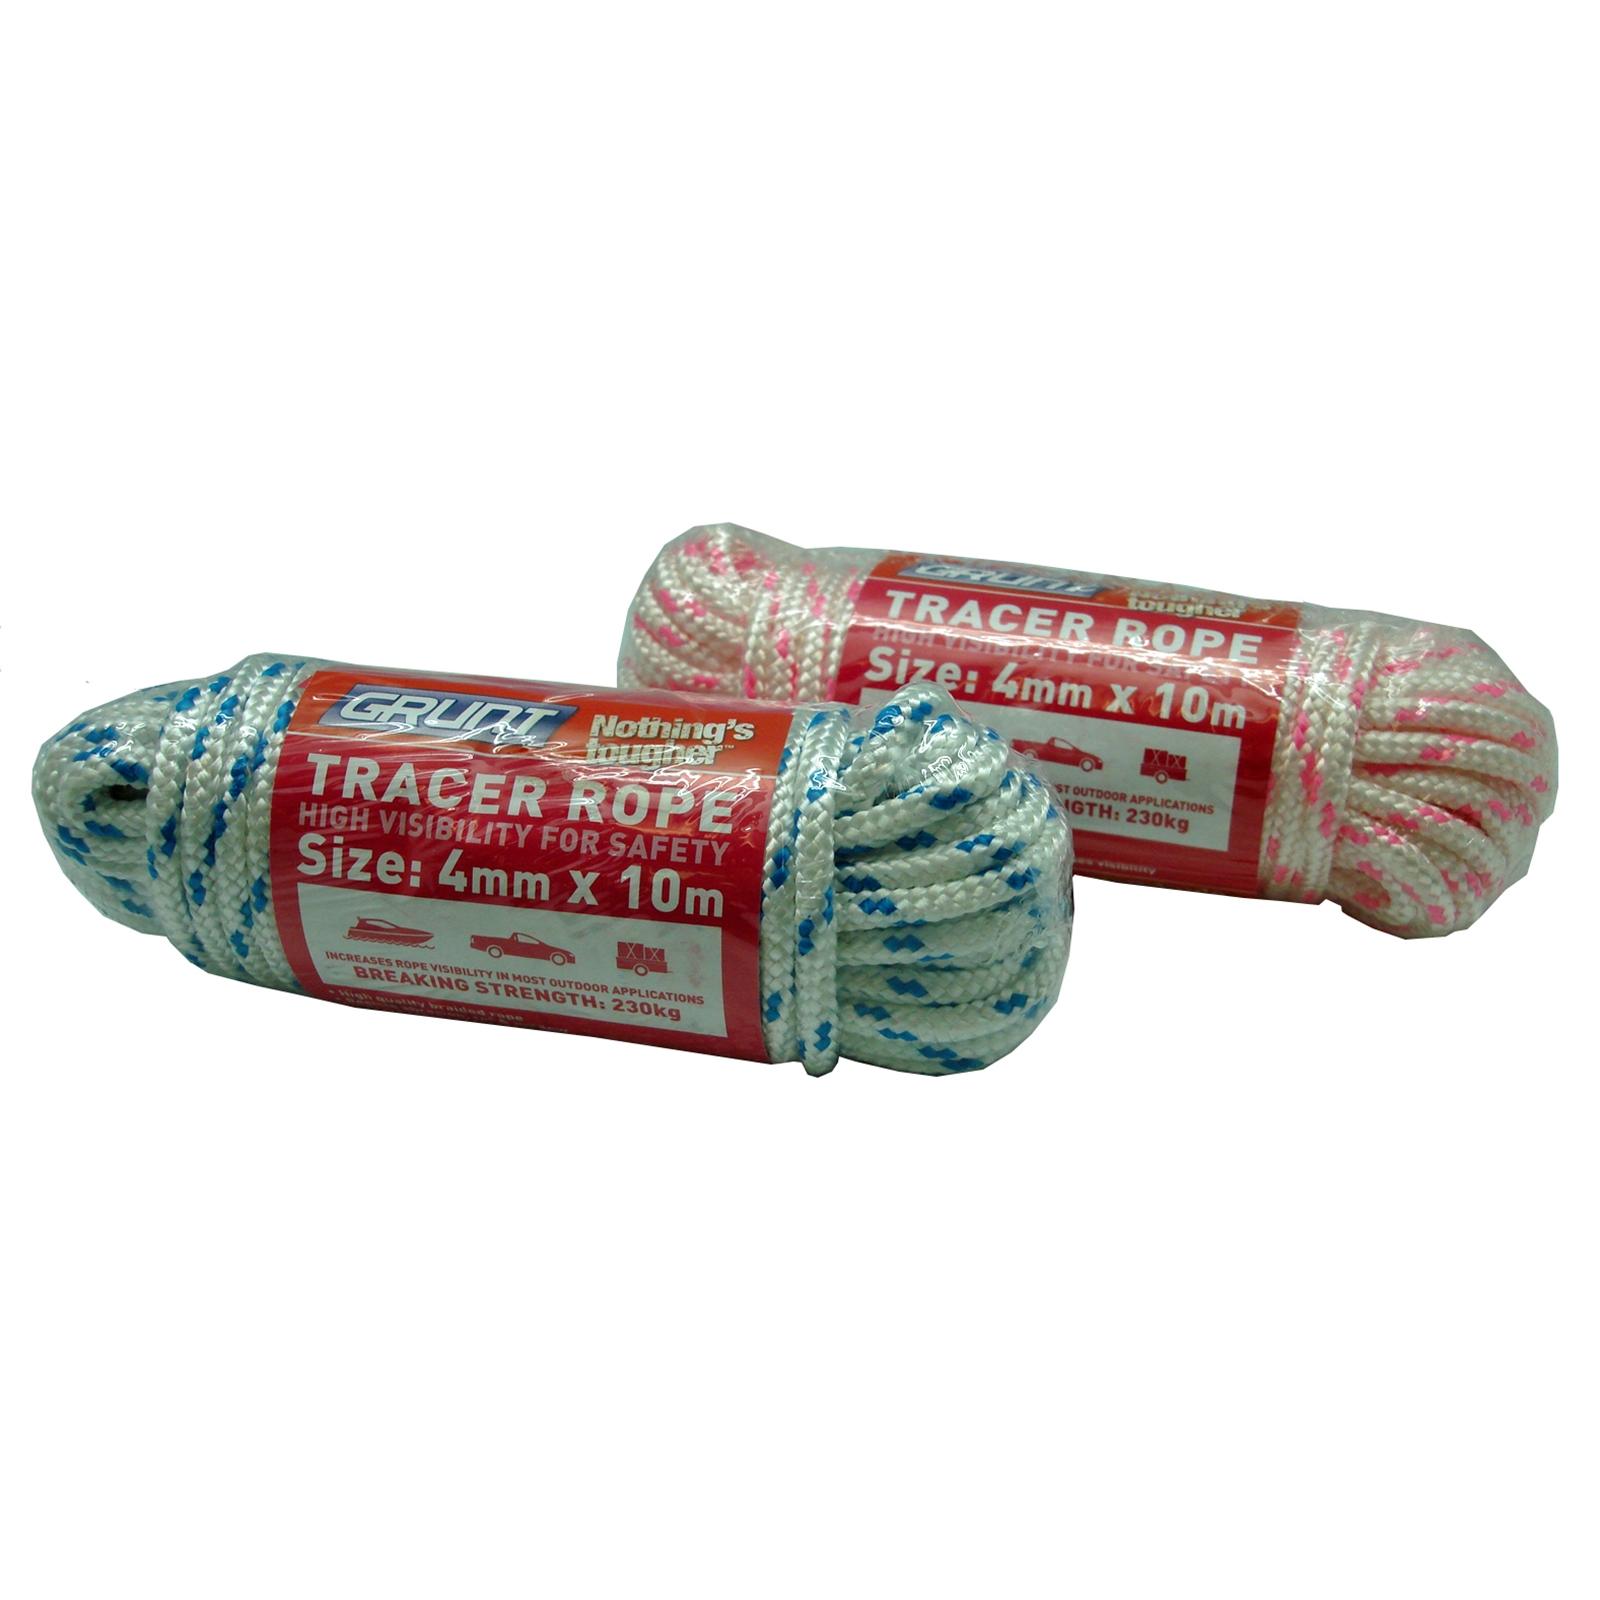 Grunt 4mm x 10m White With Pink / Blue Tracer Rope